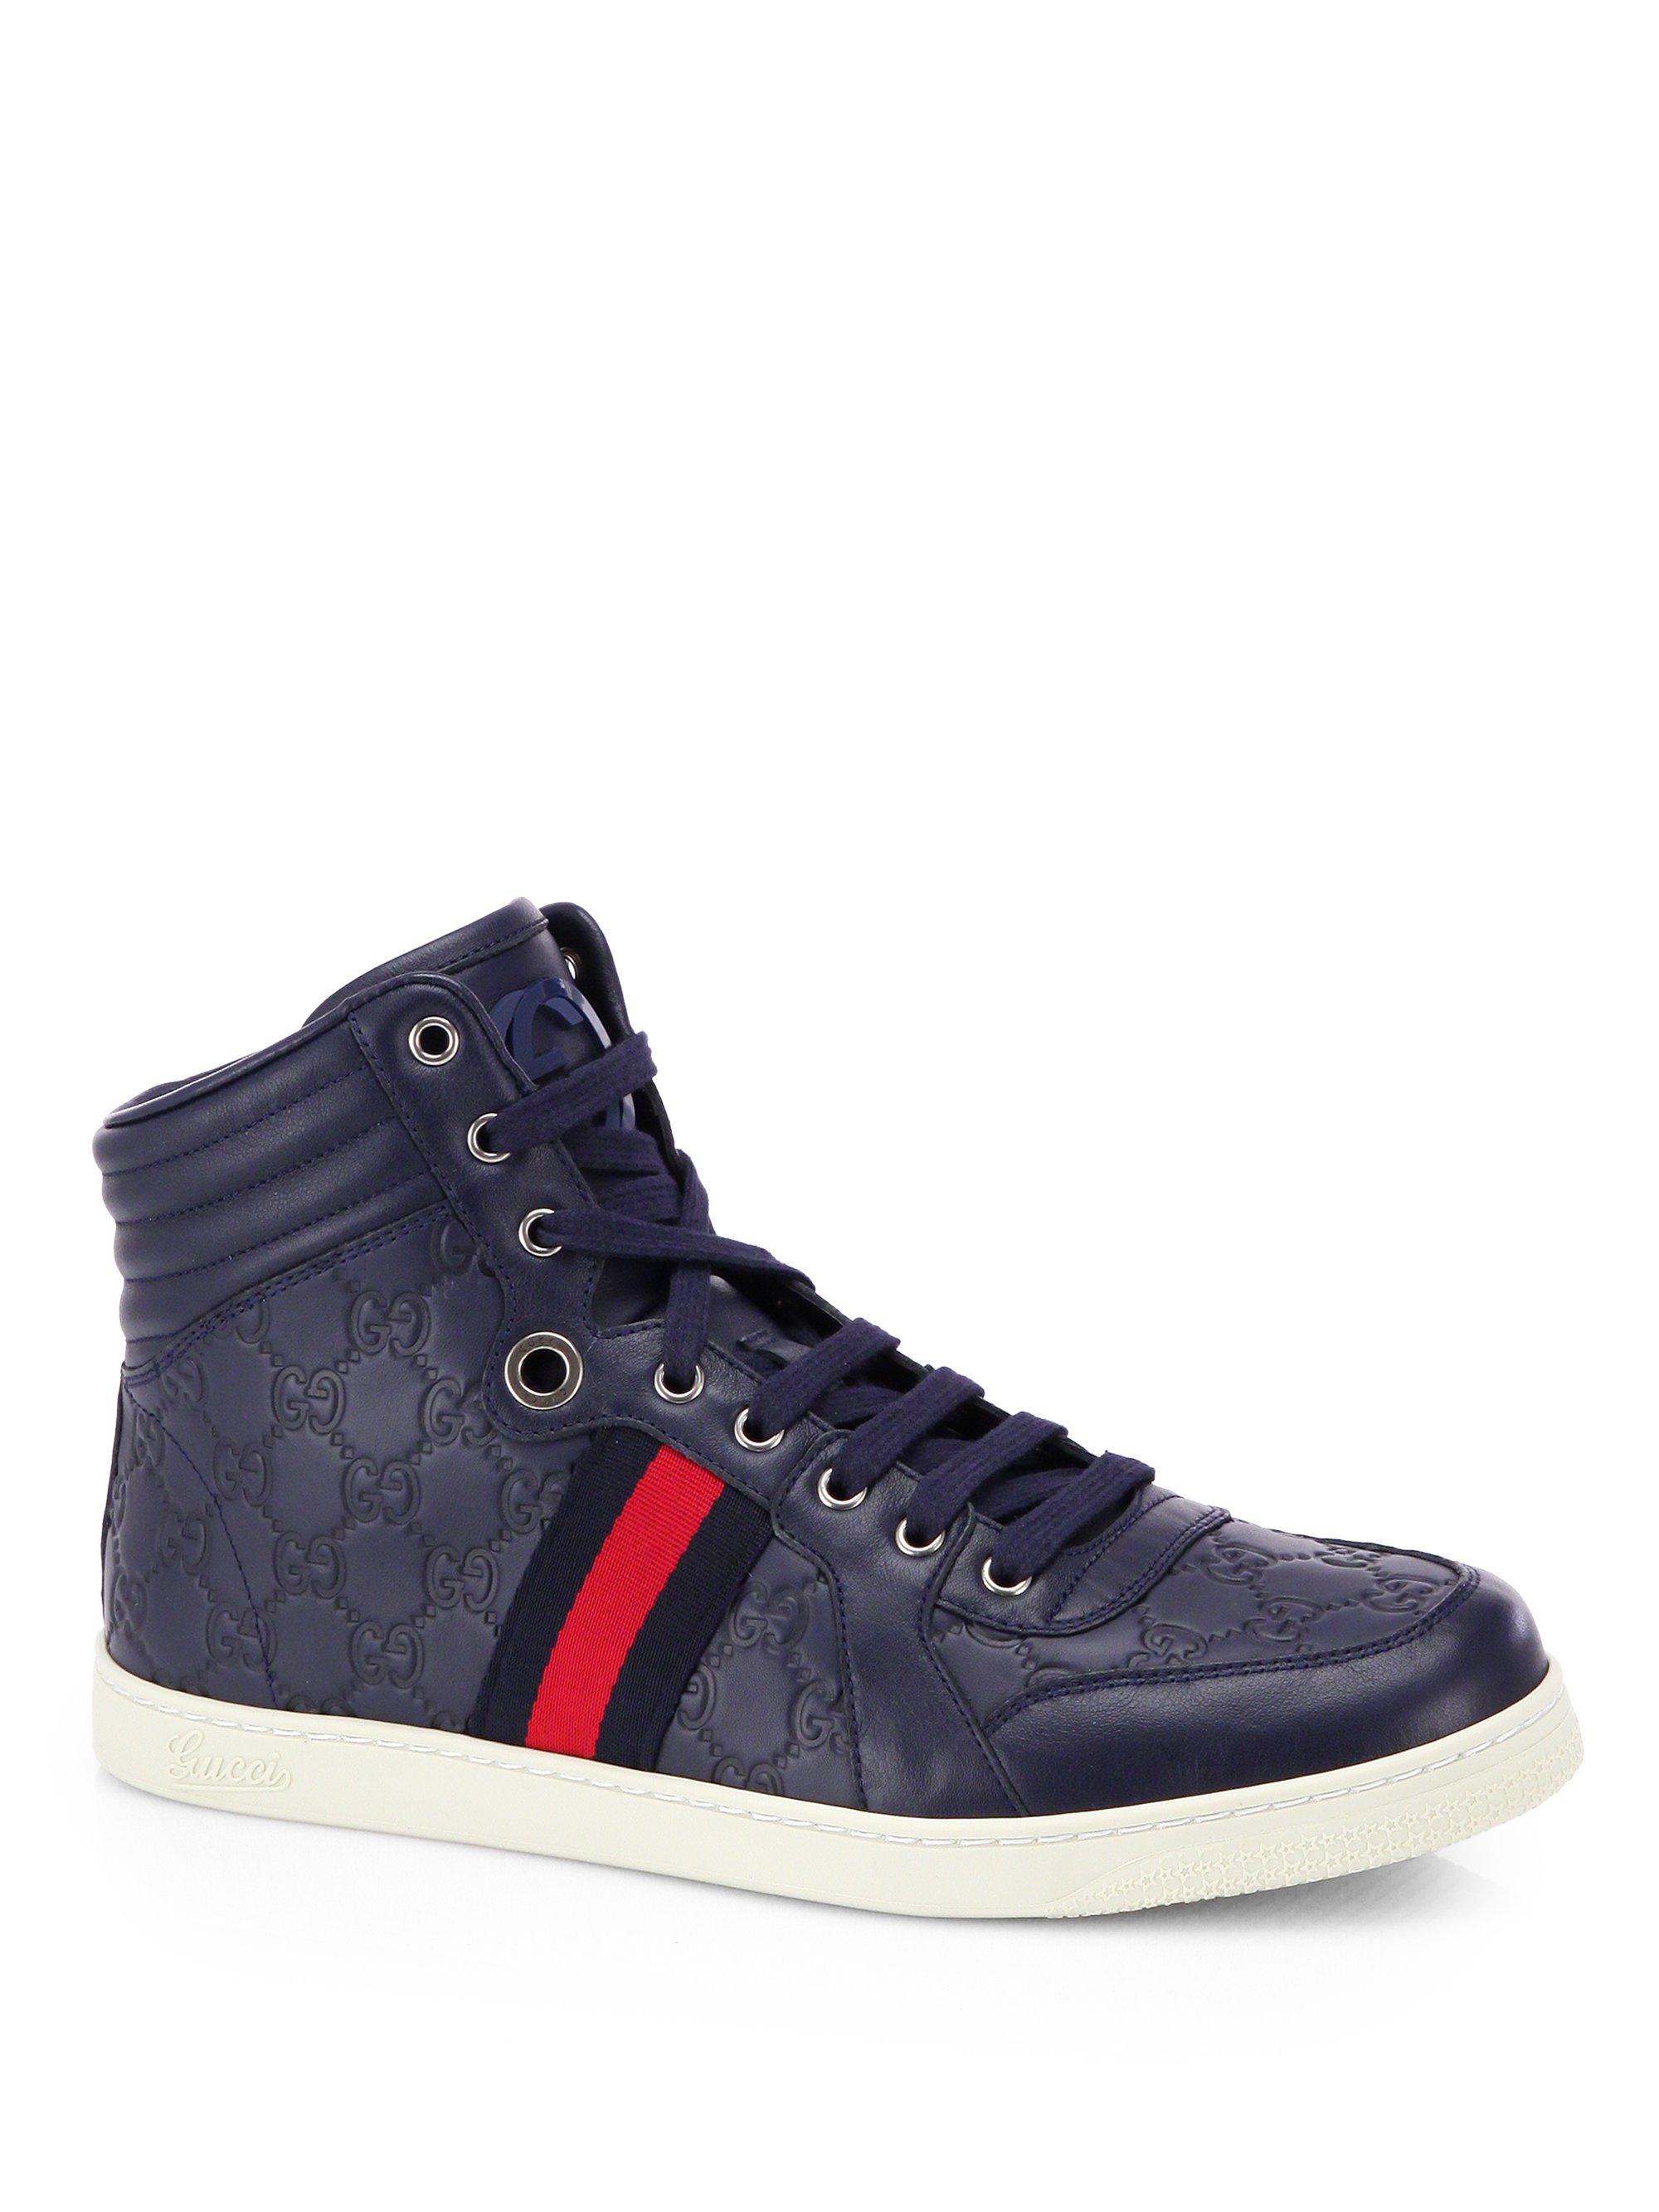 Gucci Embossed Gg Leather High-Top Sneakers in Blue for Men (BLUE-GREY) | Lyst